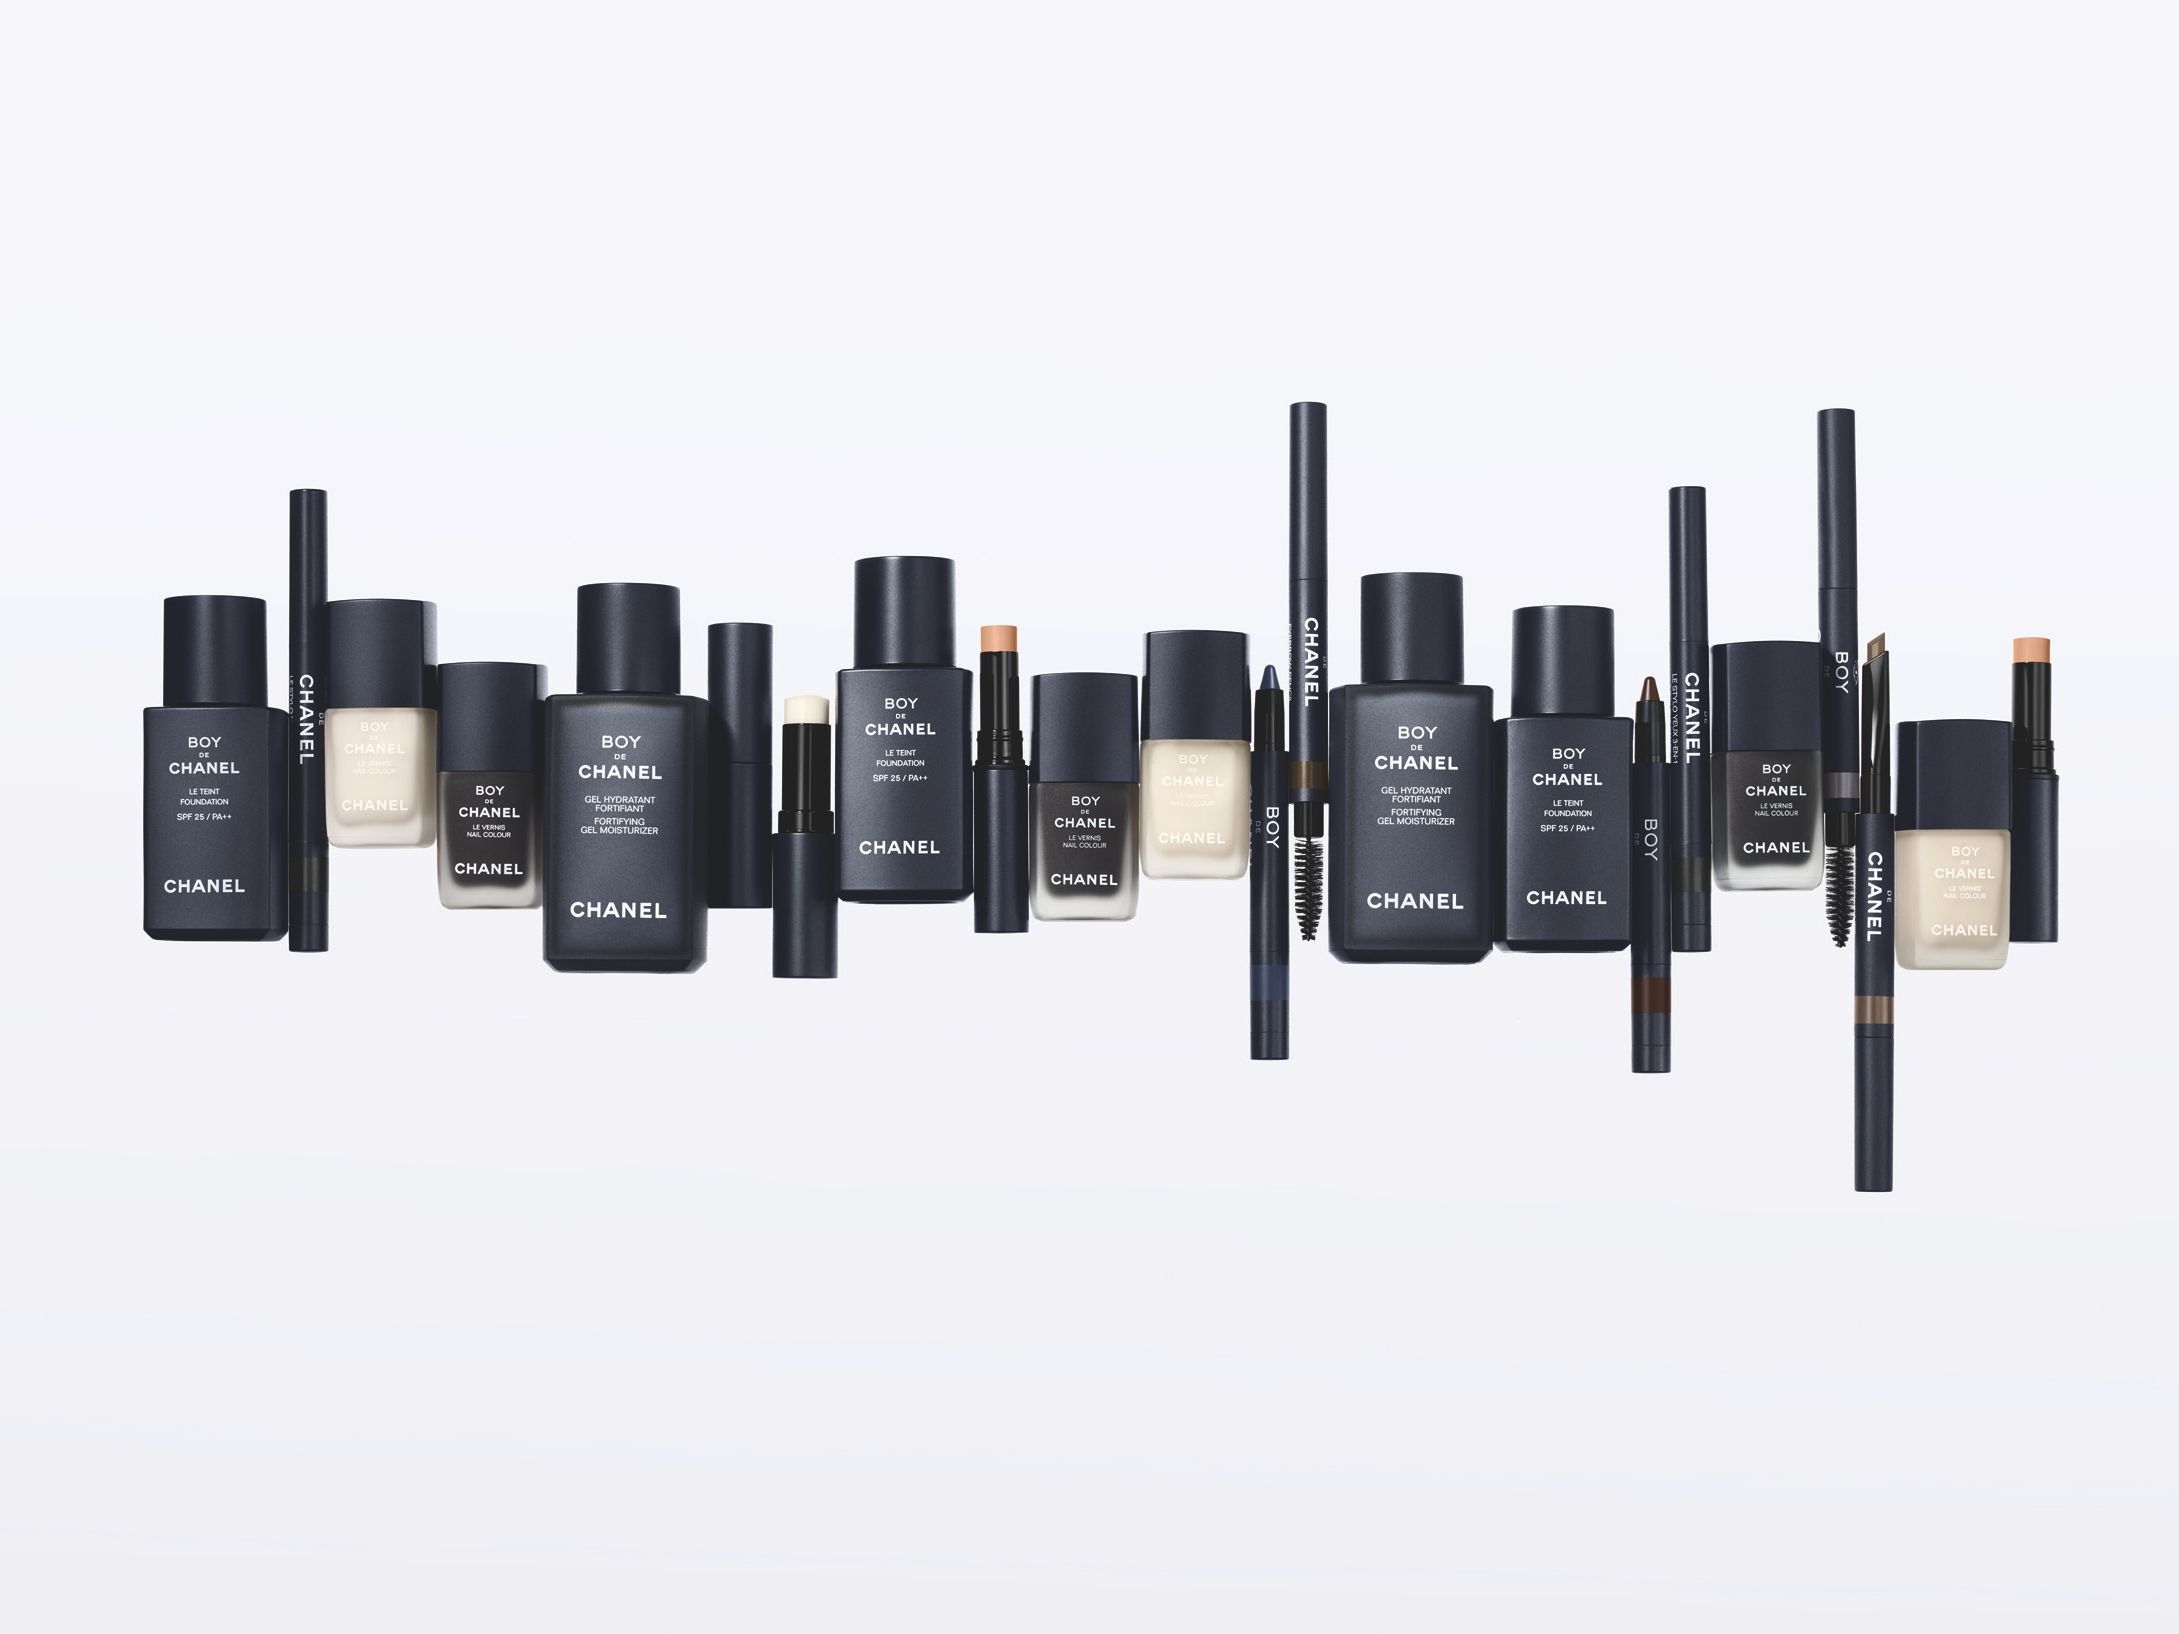 Chanel updates its Boy de Chanel collection with more makeup for men